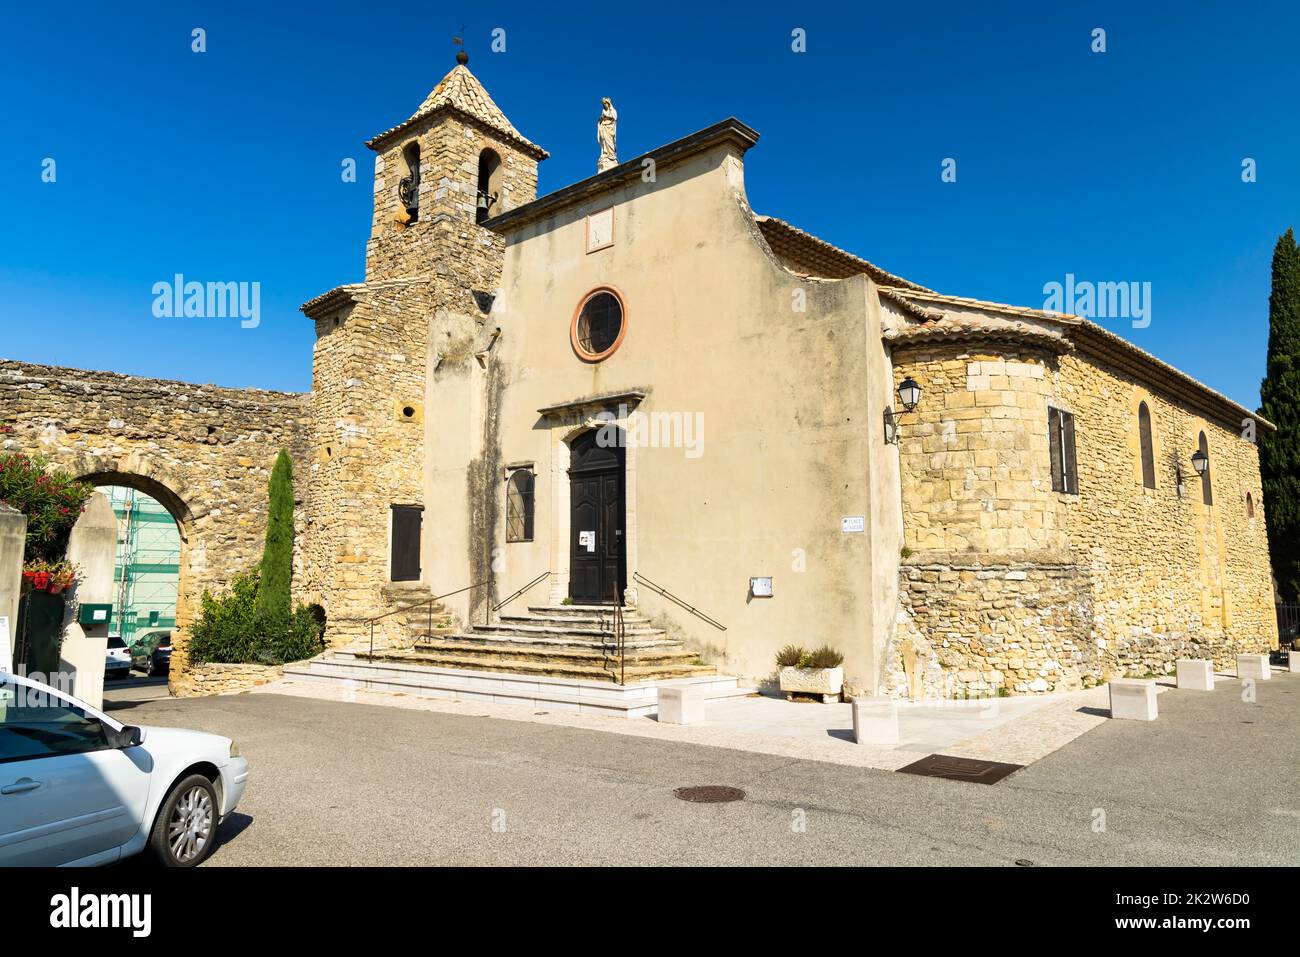 Church and old town in Vacqueyras, departement Vaucluse, Provence, France Stock Photo